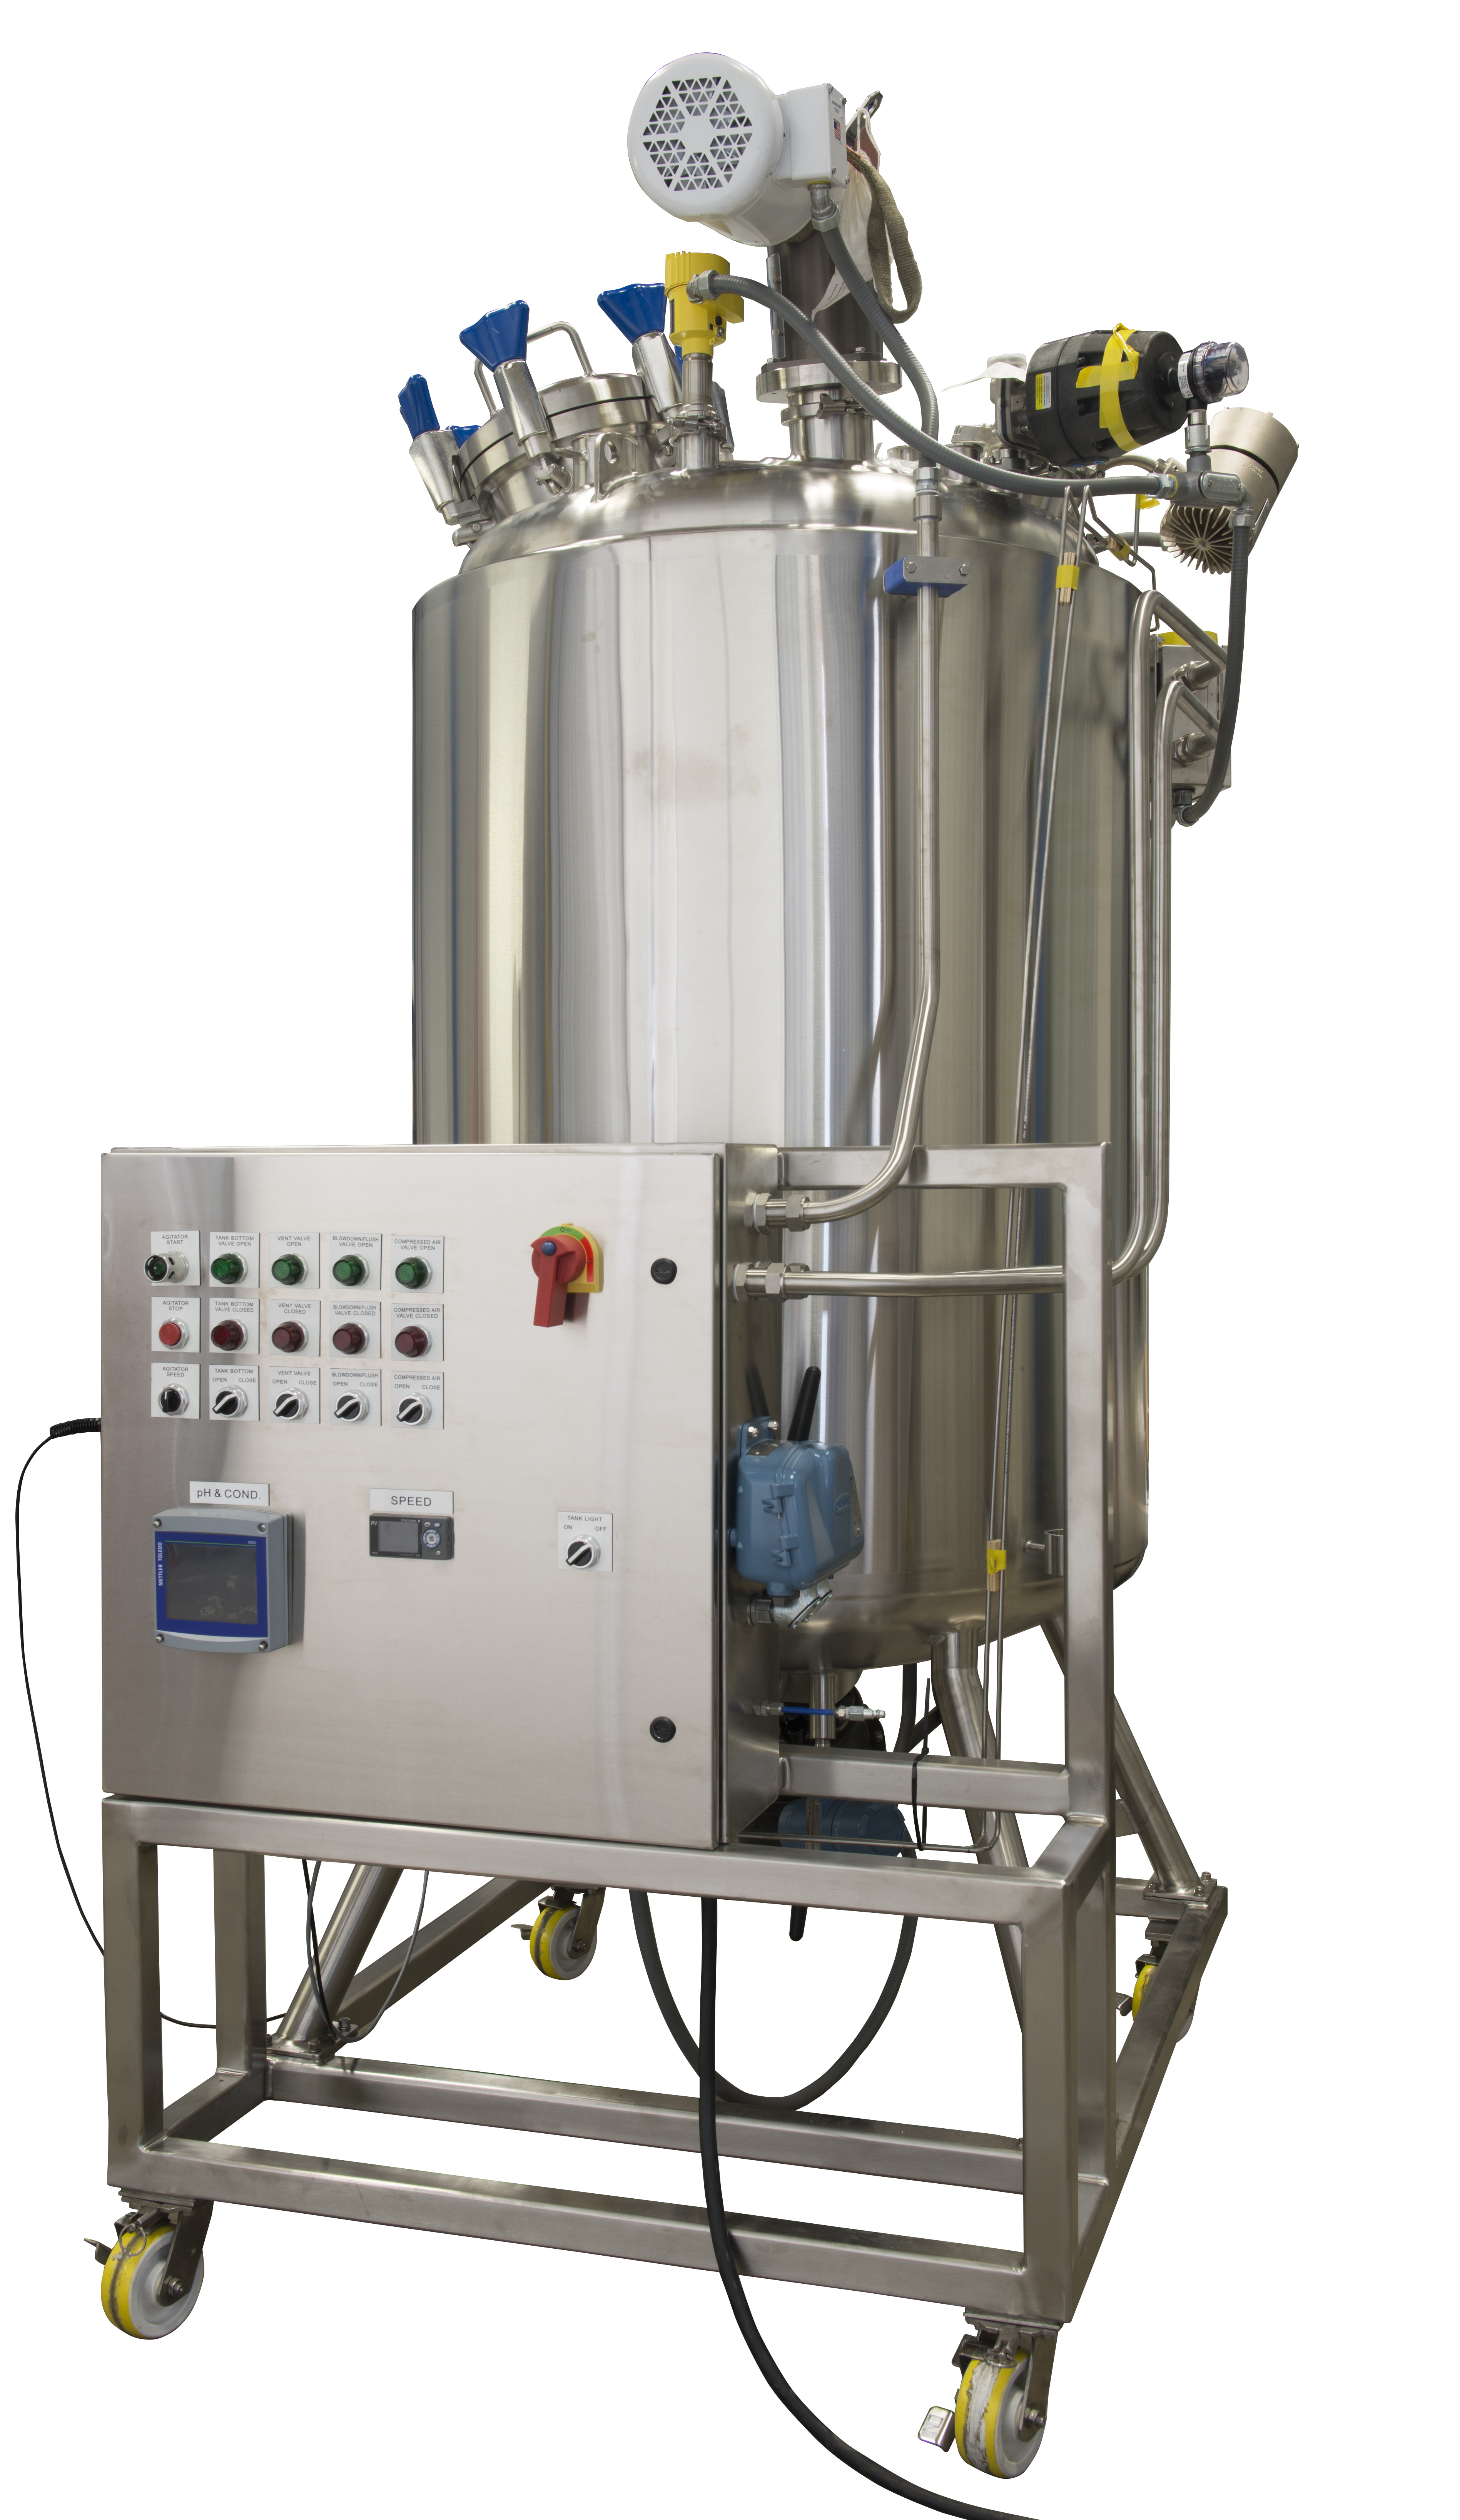 A mixing tank smart panel makes this mixing vessel by HOLLOWAY convenient.